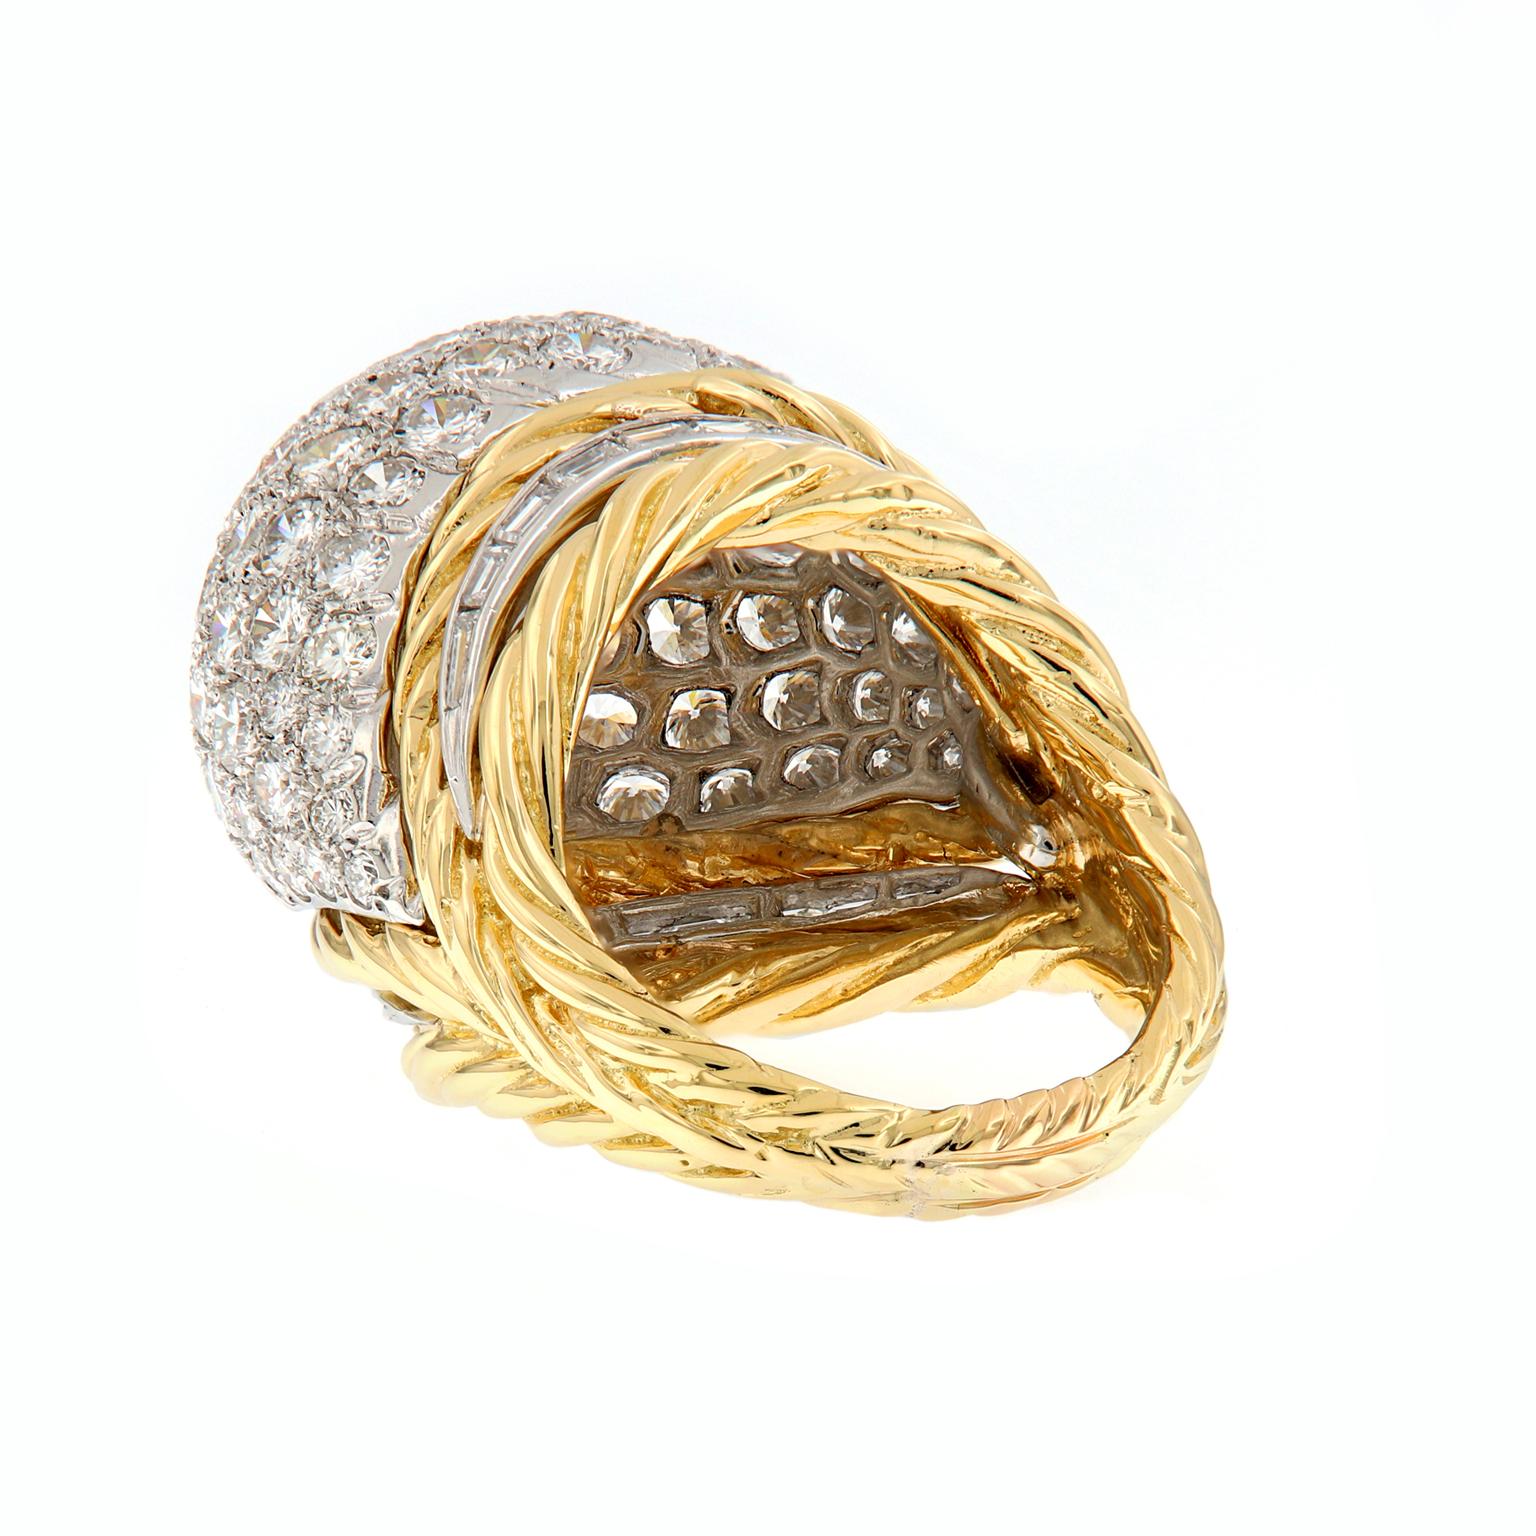 Women's Hammerman Brothers Diamond Platinum Gold Dome Cocktail Ring